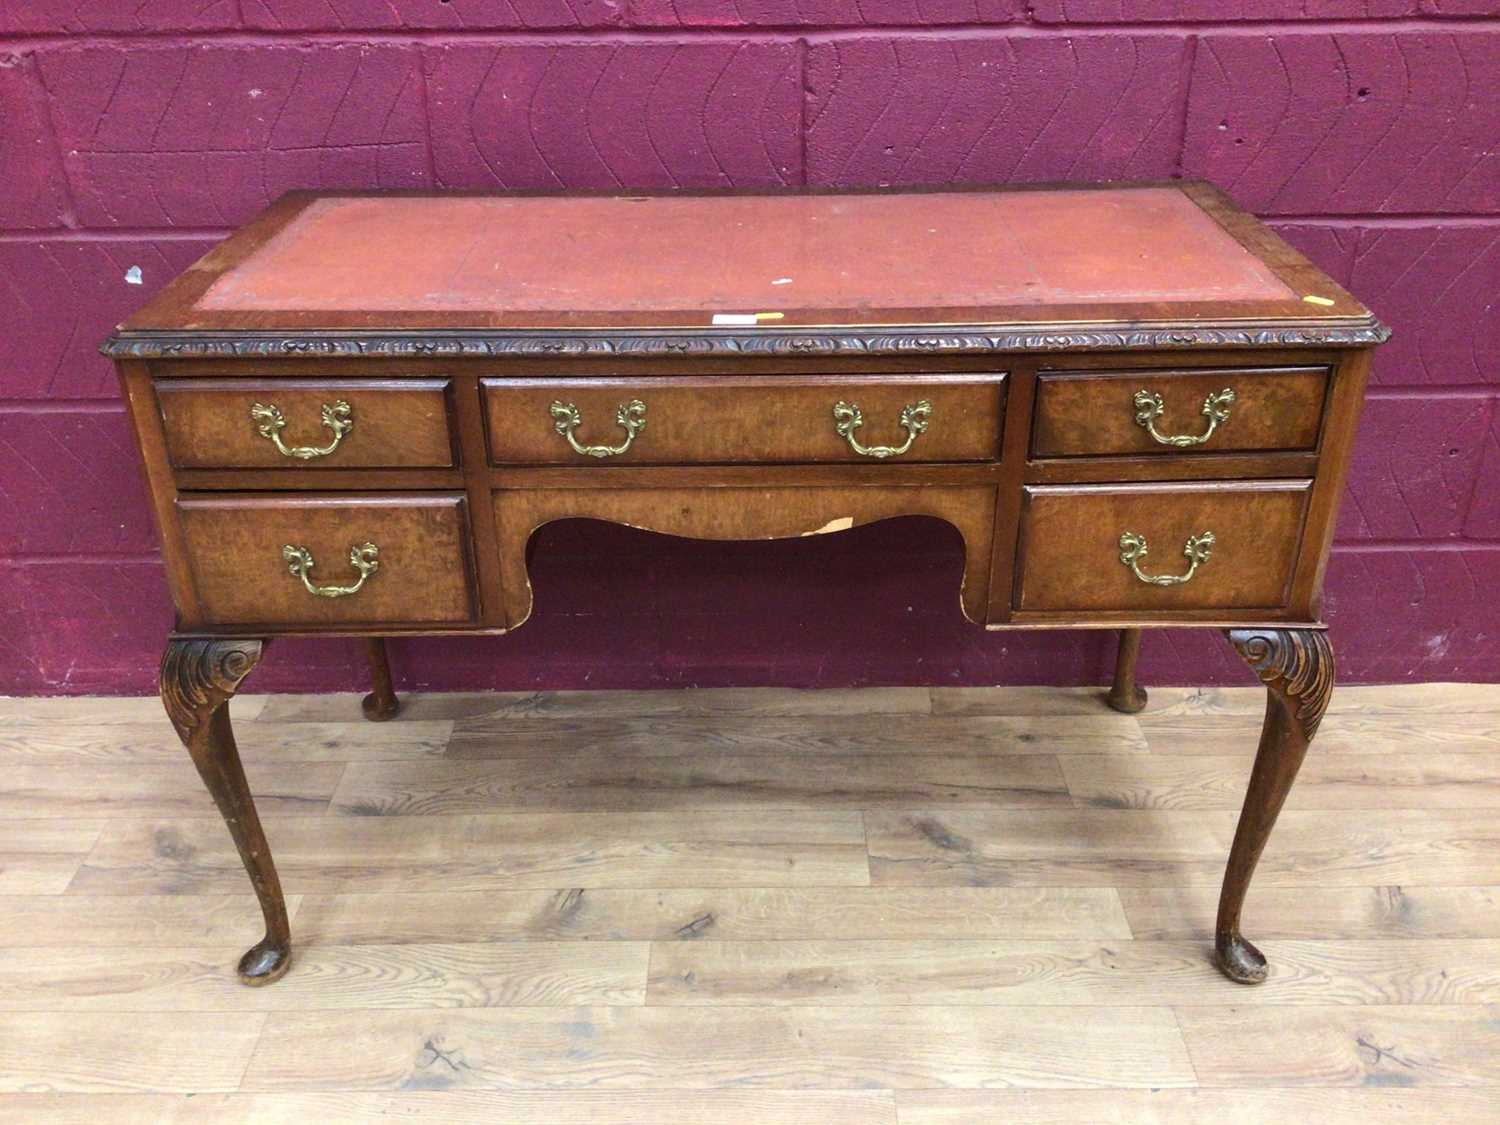 Lot 308 - Kneehole desk with tooled leather top, five drawers on cabriole legs